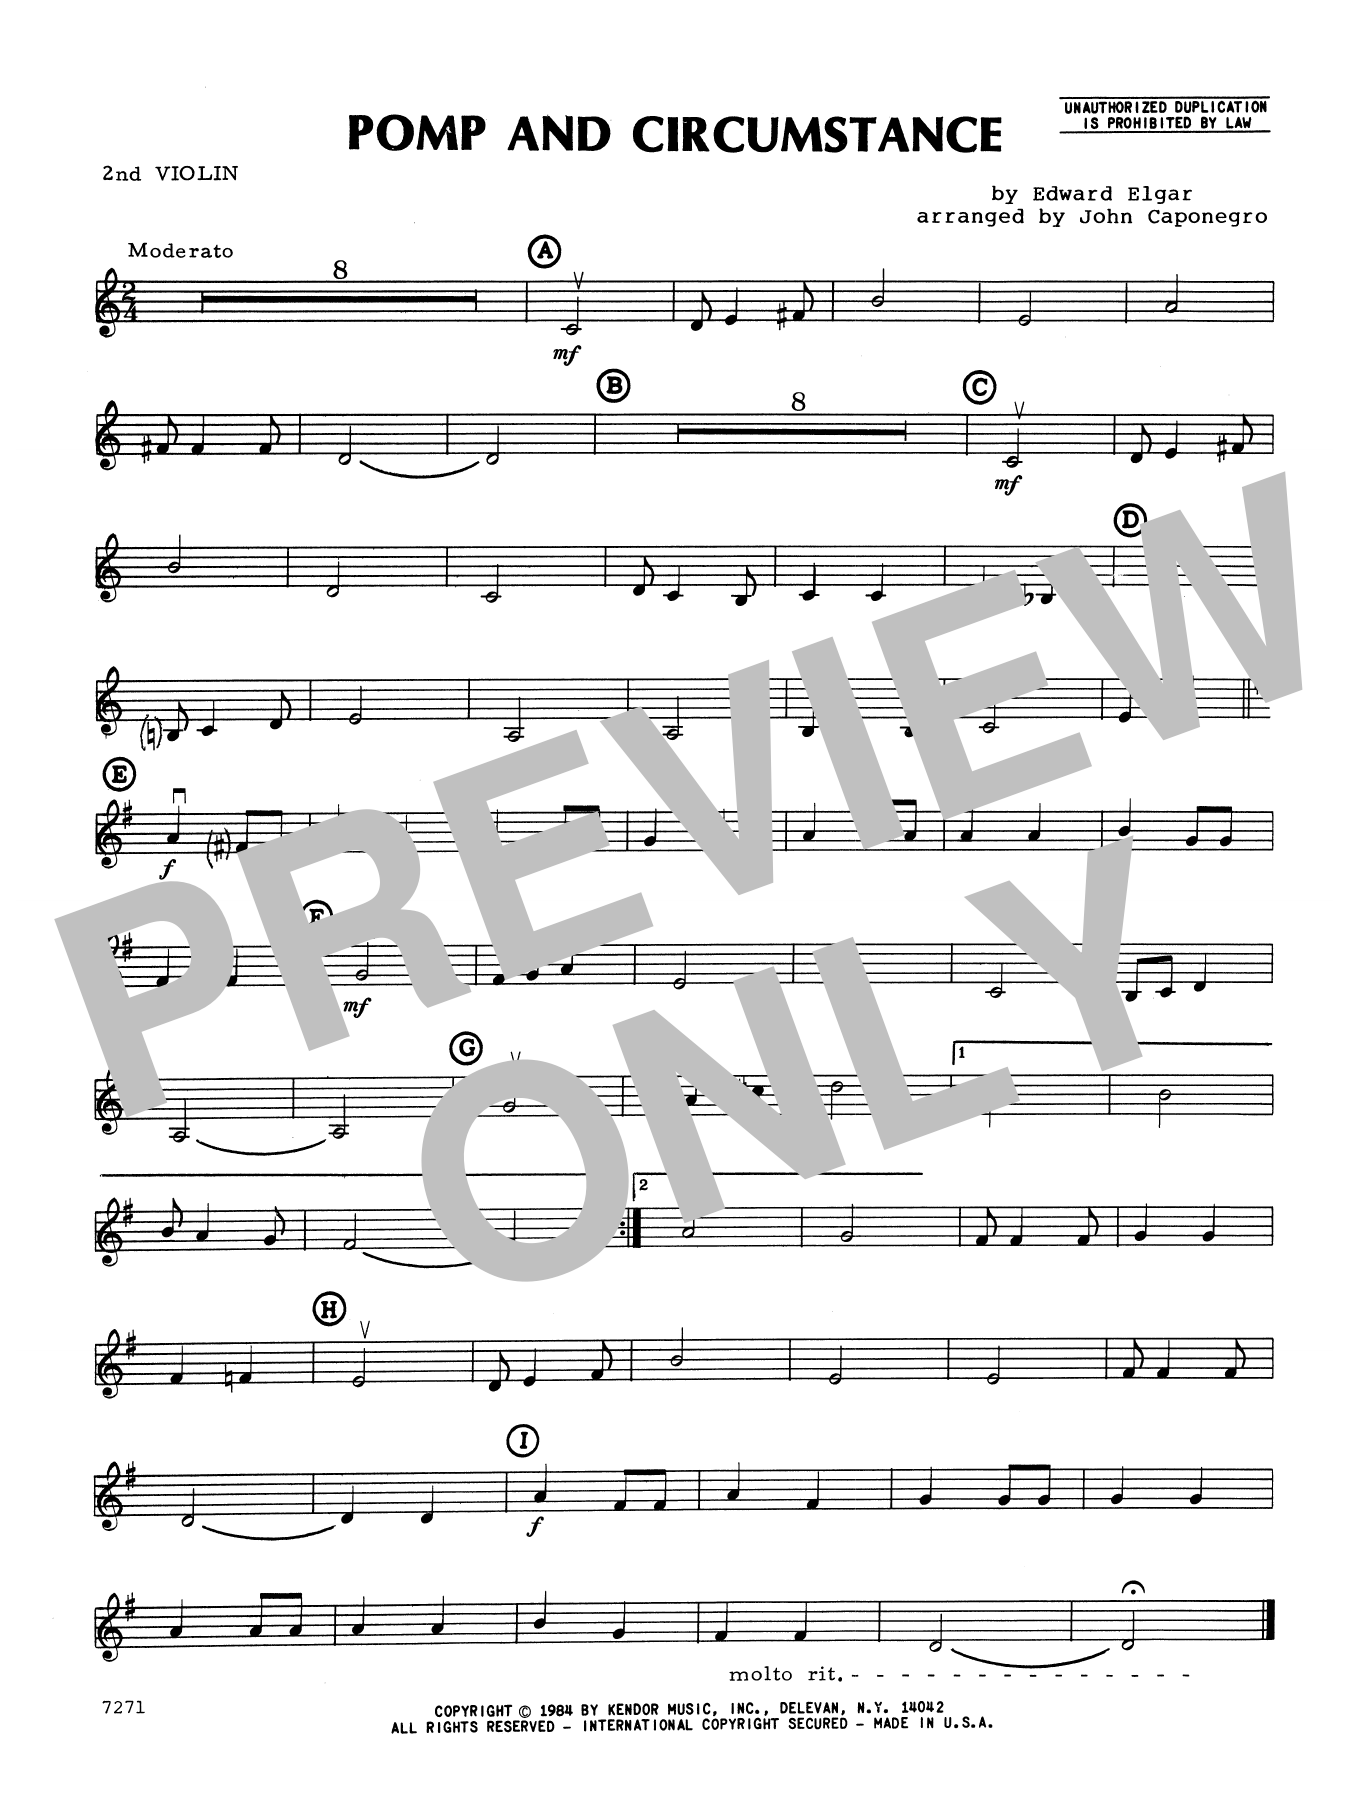 Download John Caponegro Pomp And Circumstance - 2nd Violin Sheet Music